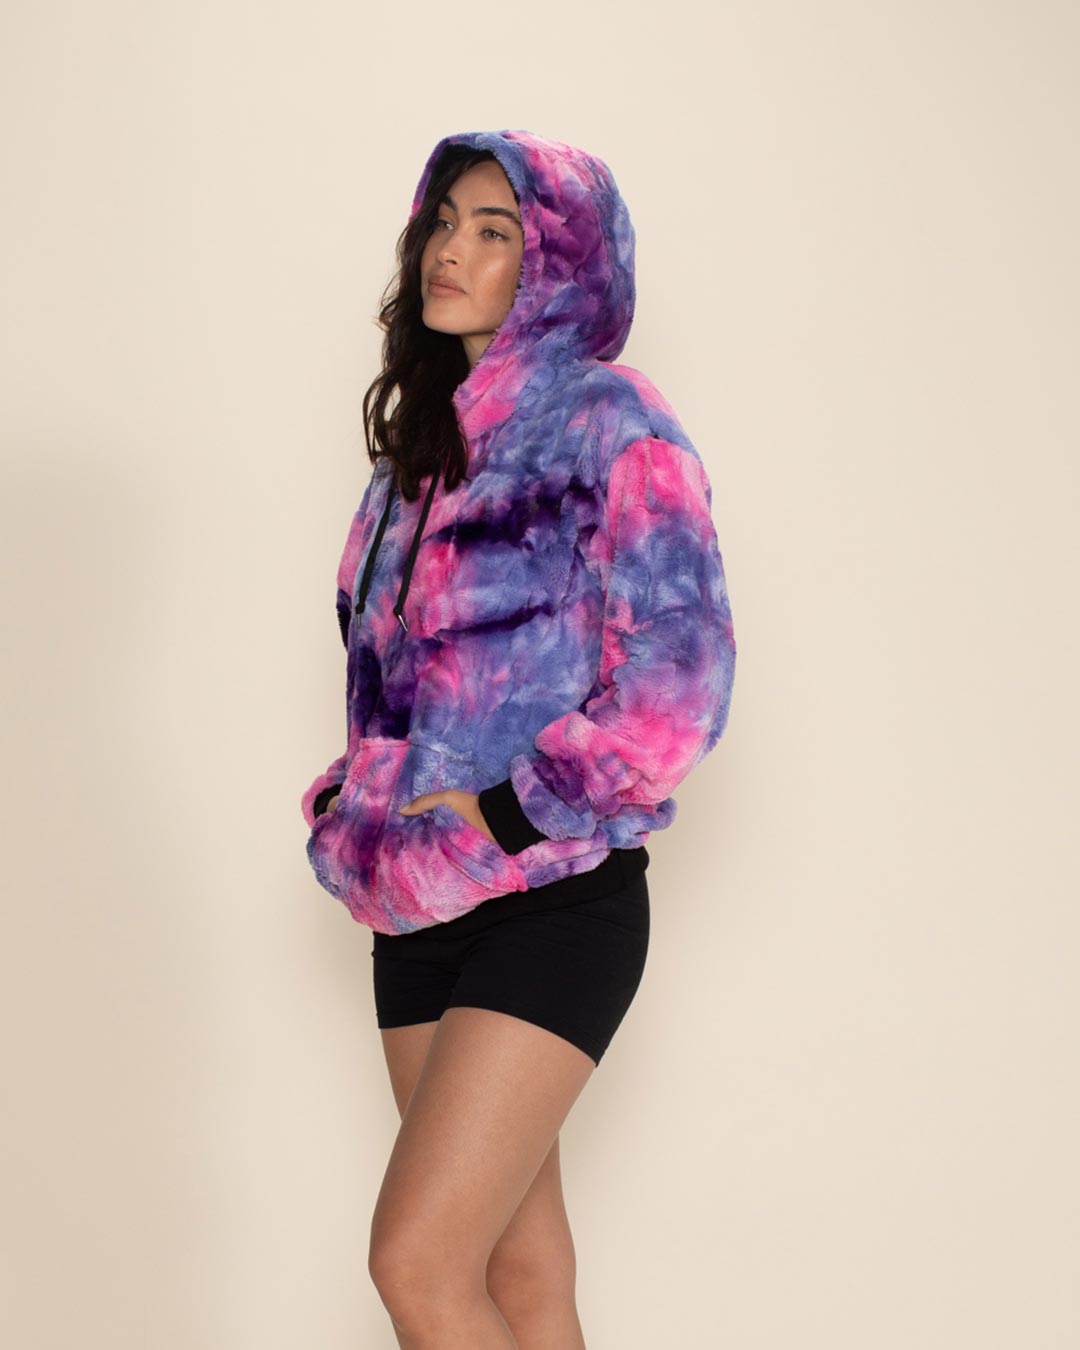 Cotton Candy Kitty Hooded ULTRA SOFT Faux Fur Hoodie | Women's